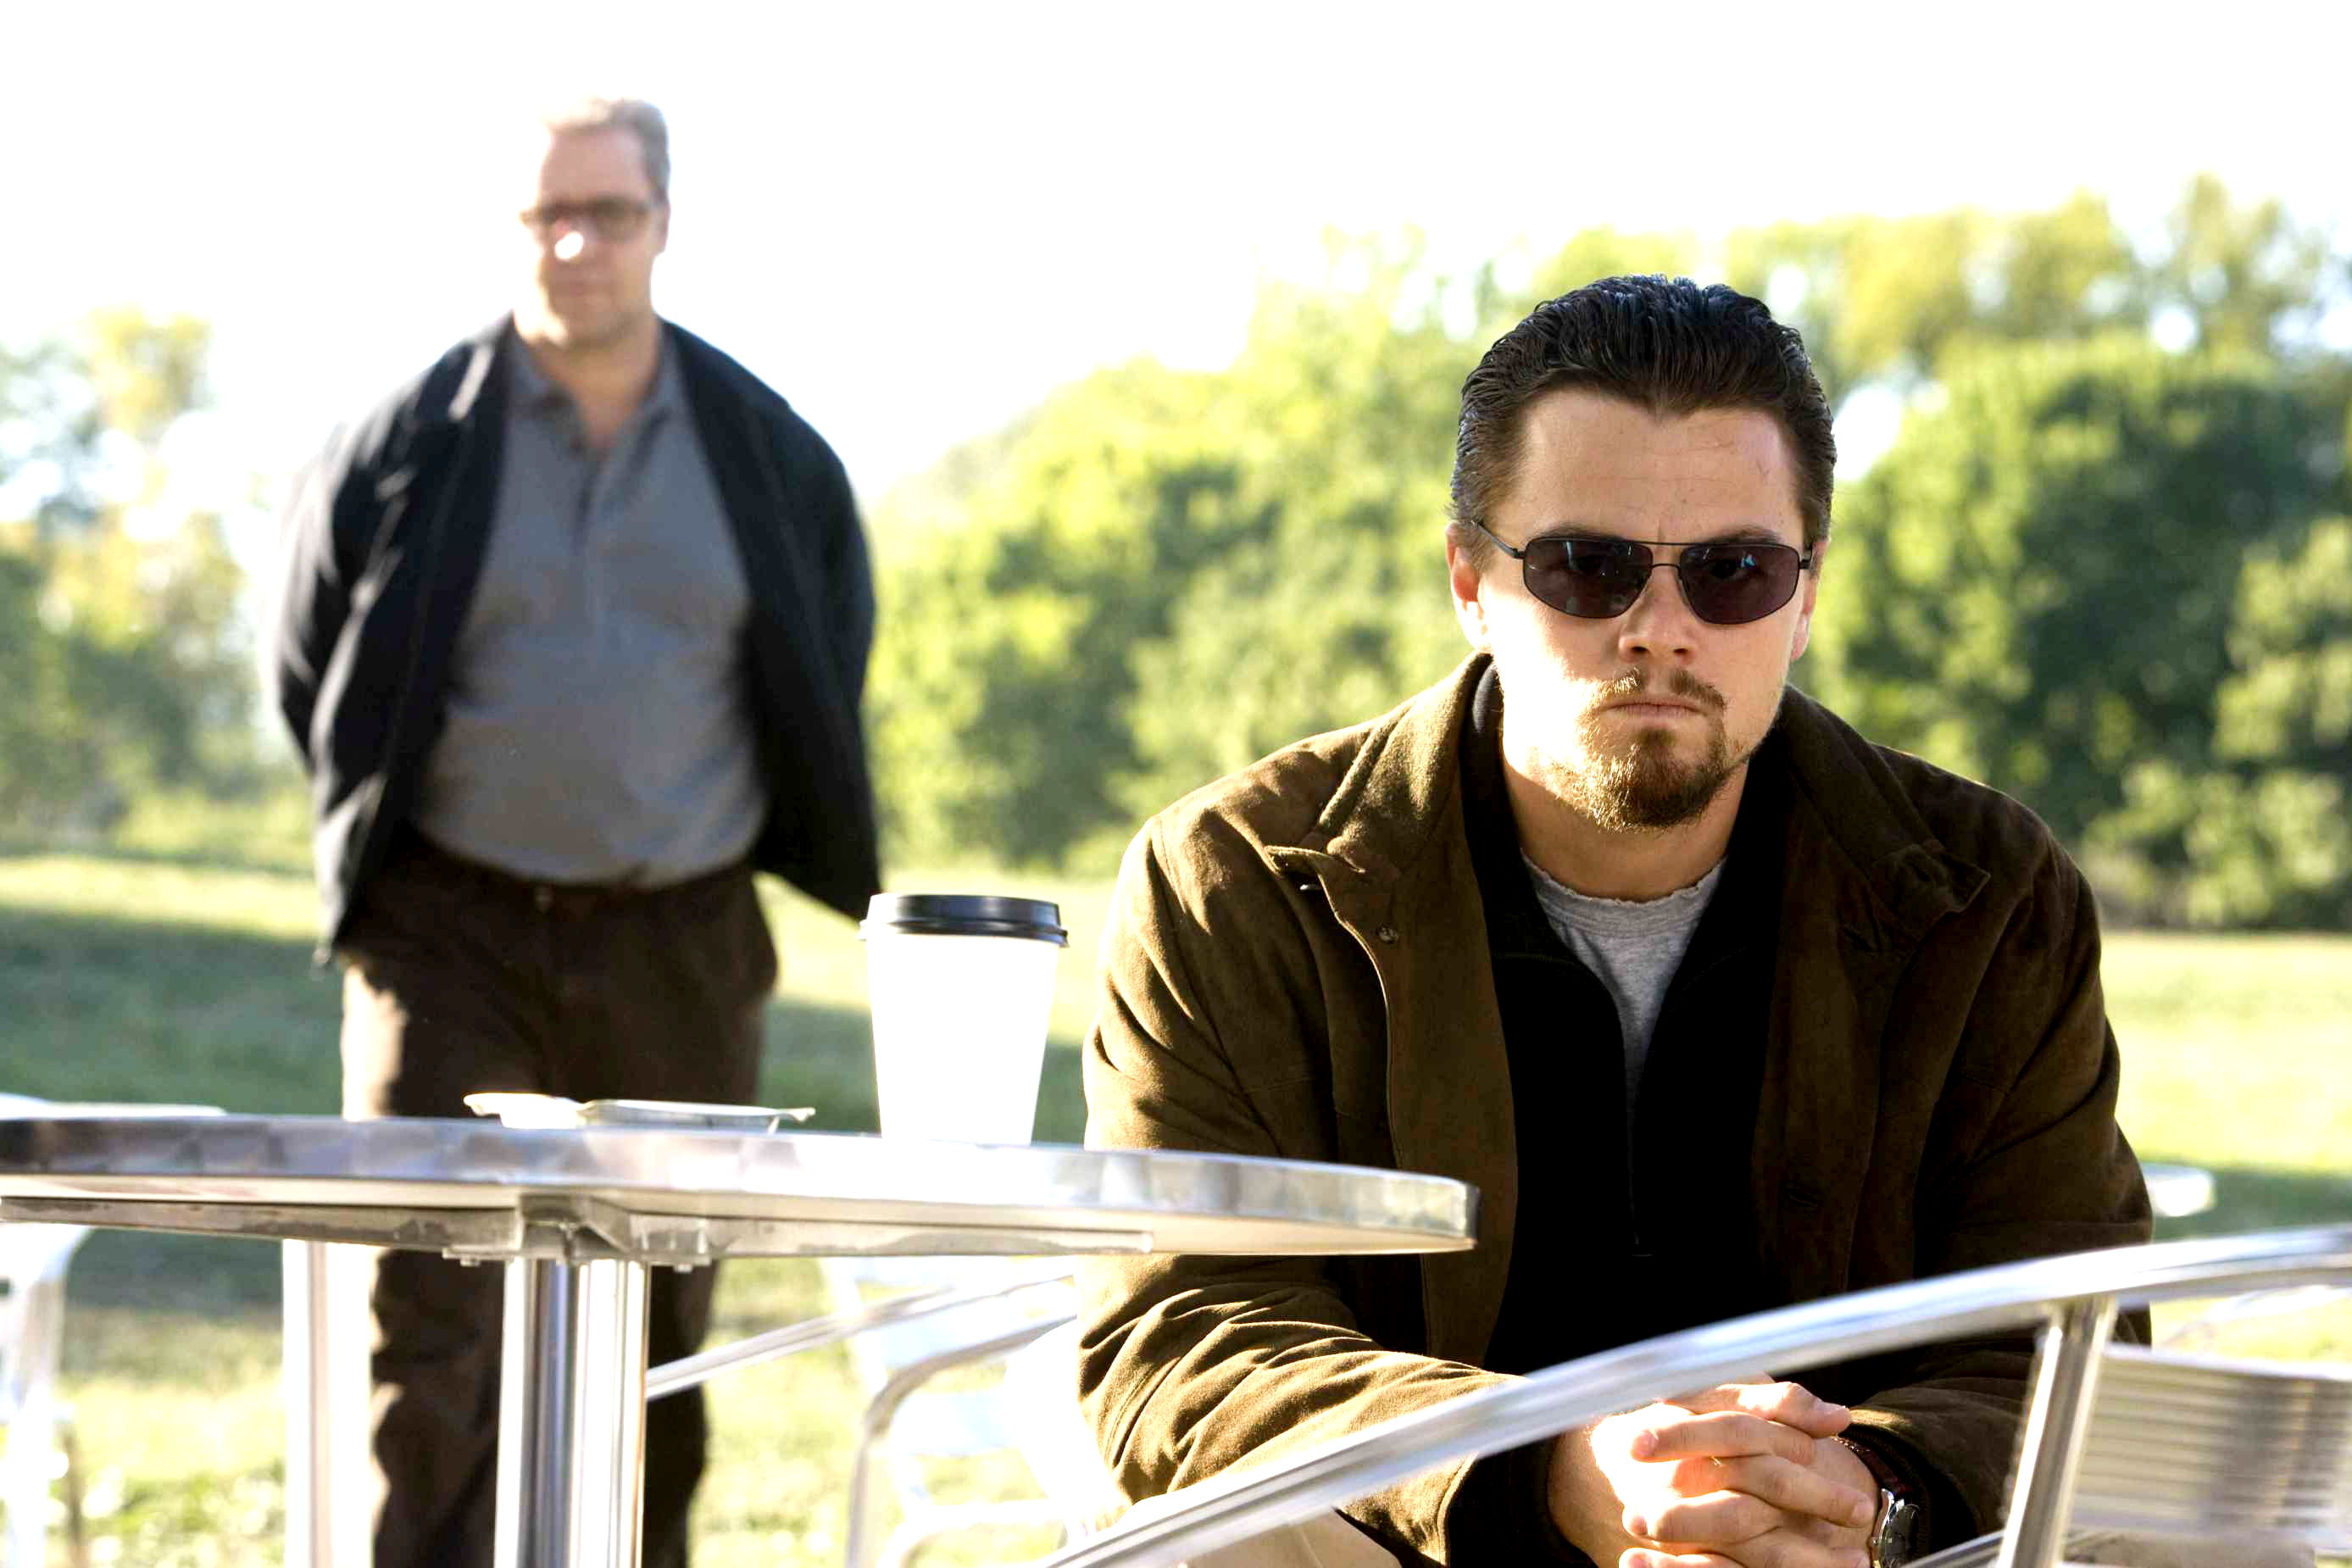 Russell Crowe stars as Ed Hoffman and Leonardo DiCaprio stars as Roger Ferris in Warner Bros. Pictures' Body of Lies (2008). Photo credit by Francois Duhamel.